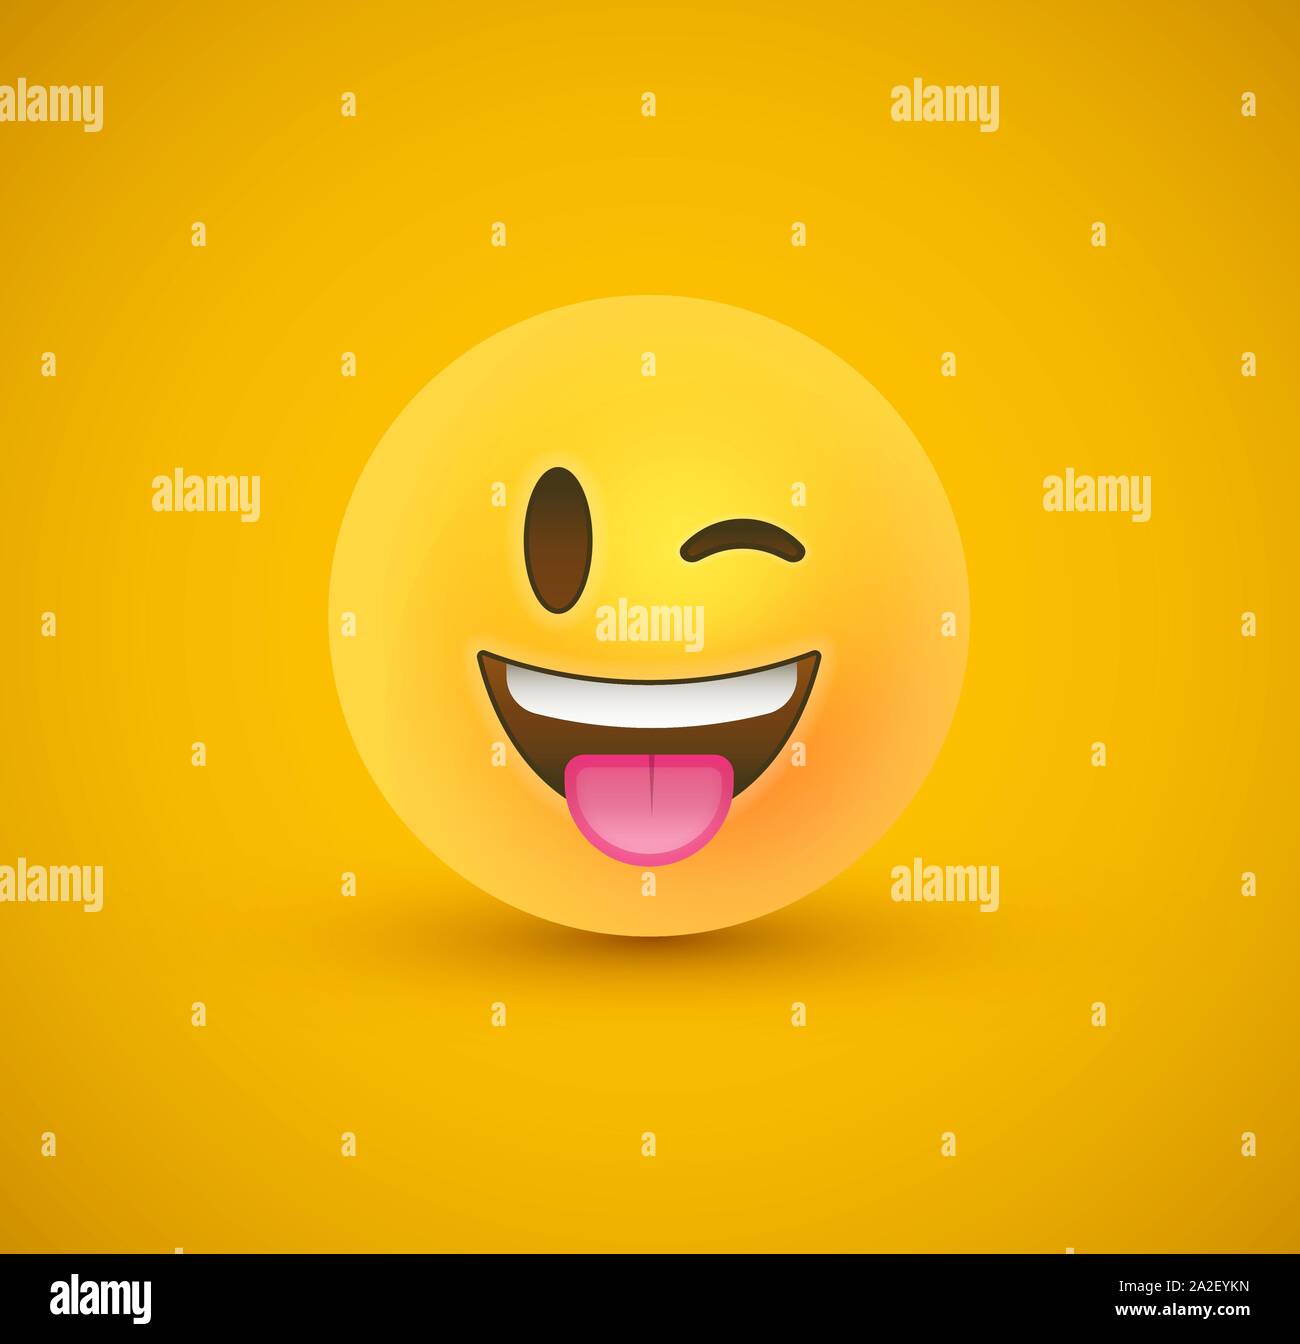 Wink 3d playful smile emoticon face on yellow color background. Modern social reaction for funny children or teen joke expression concept. Realistic c Stock Vector